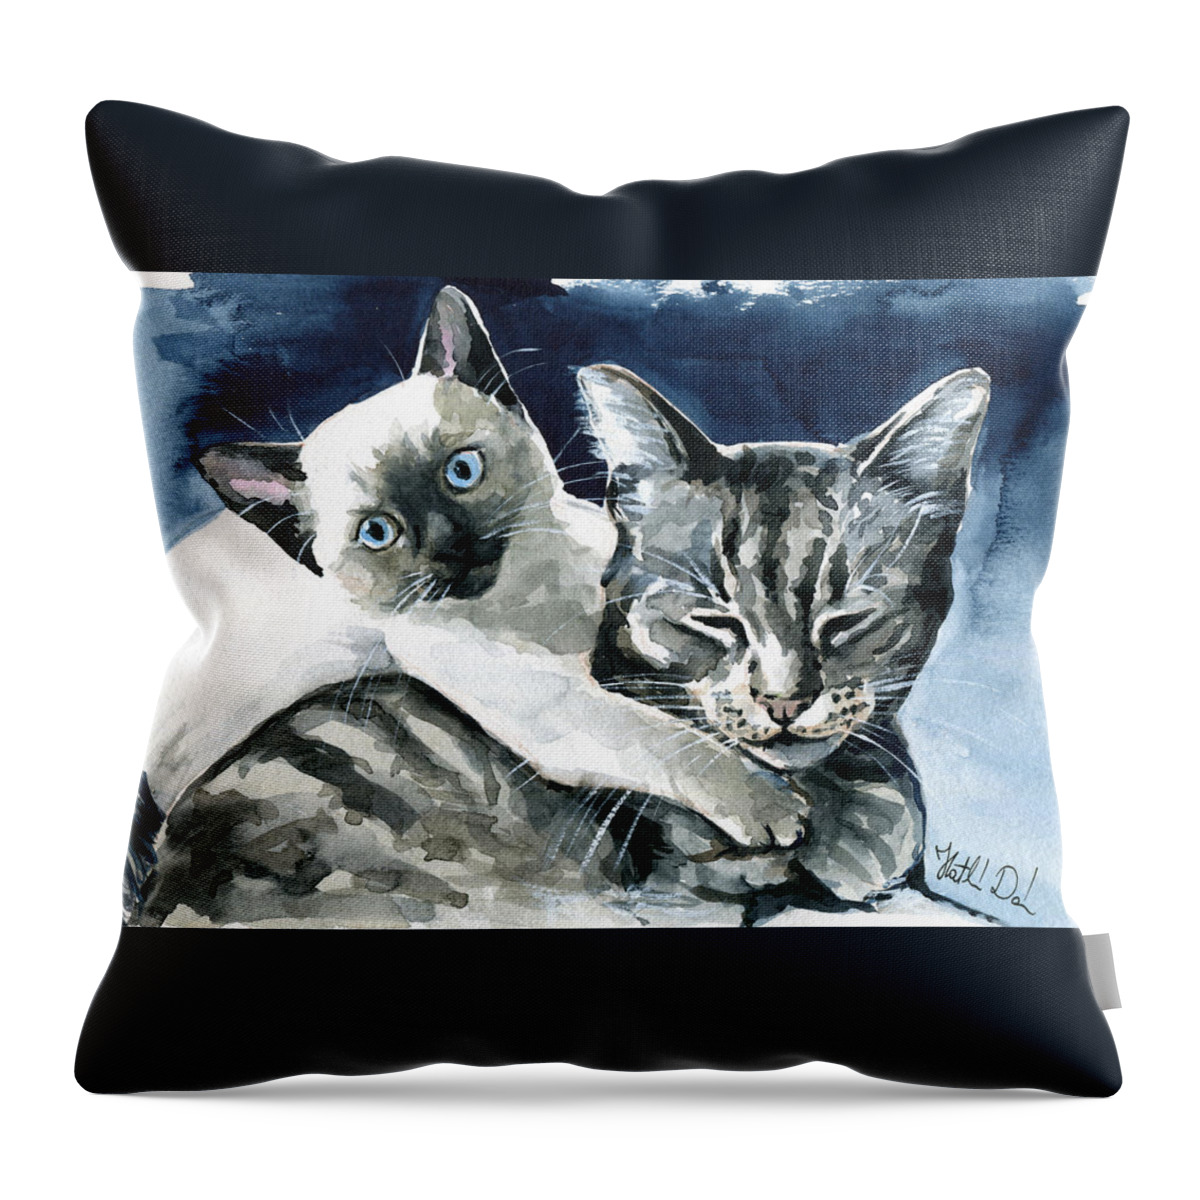 Cat Throw Pillow featuring the painting You Are Mine - Cat Painting by Dora Hathazi Mendes